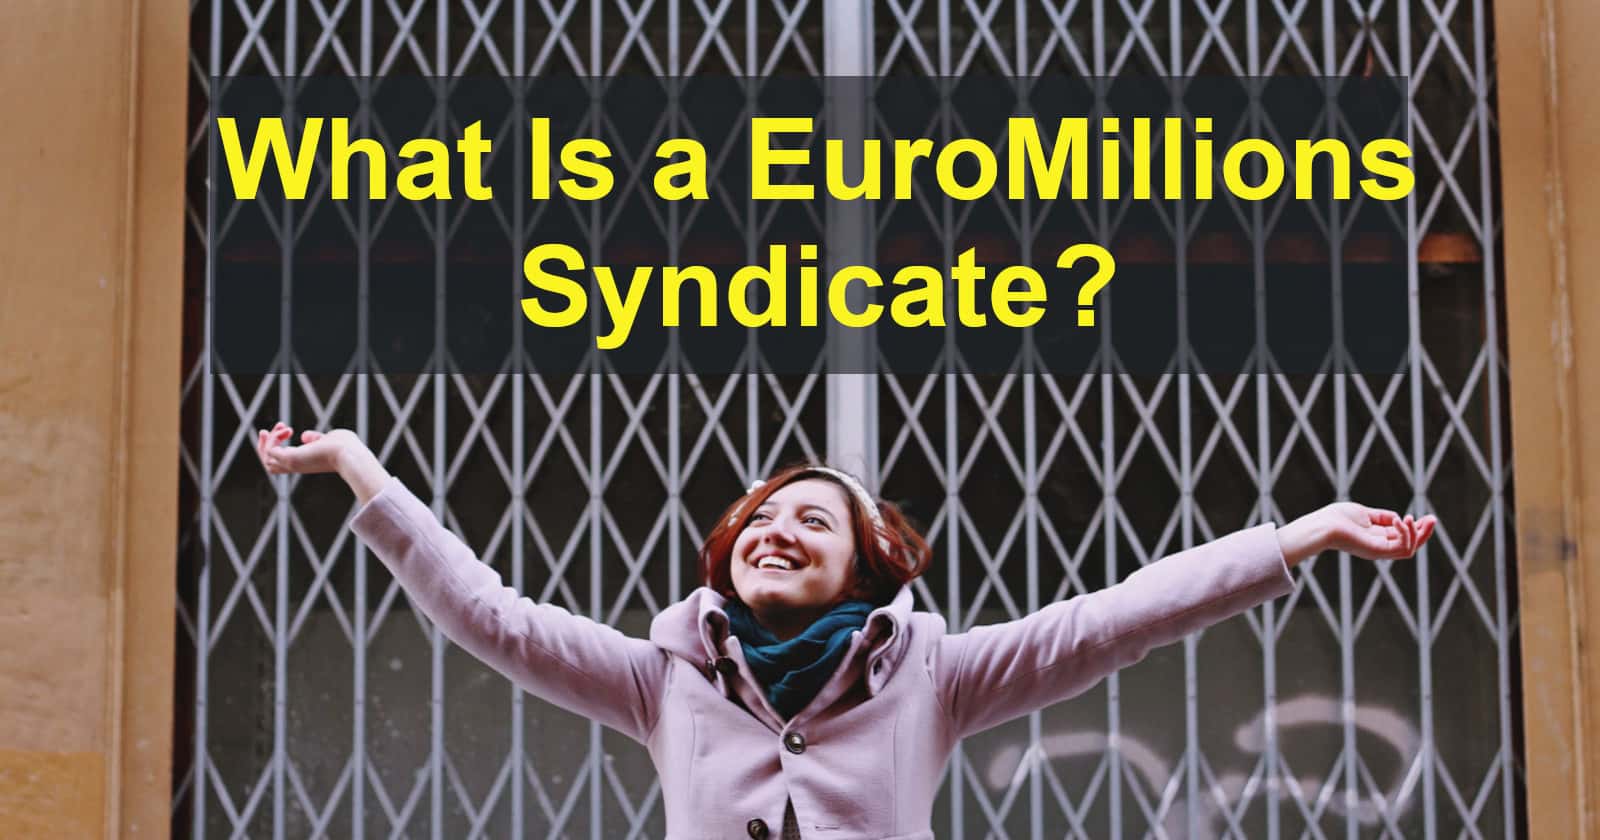 What is a EuroMillions syndicate?